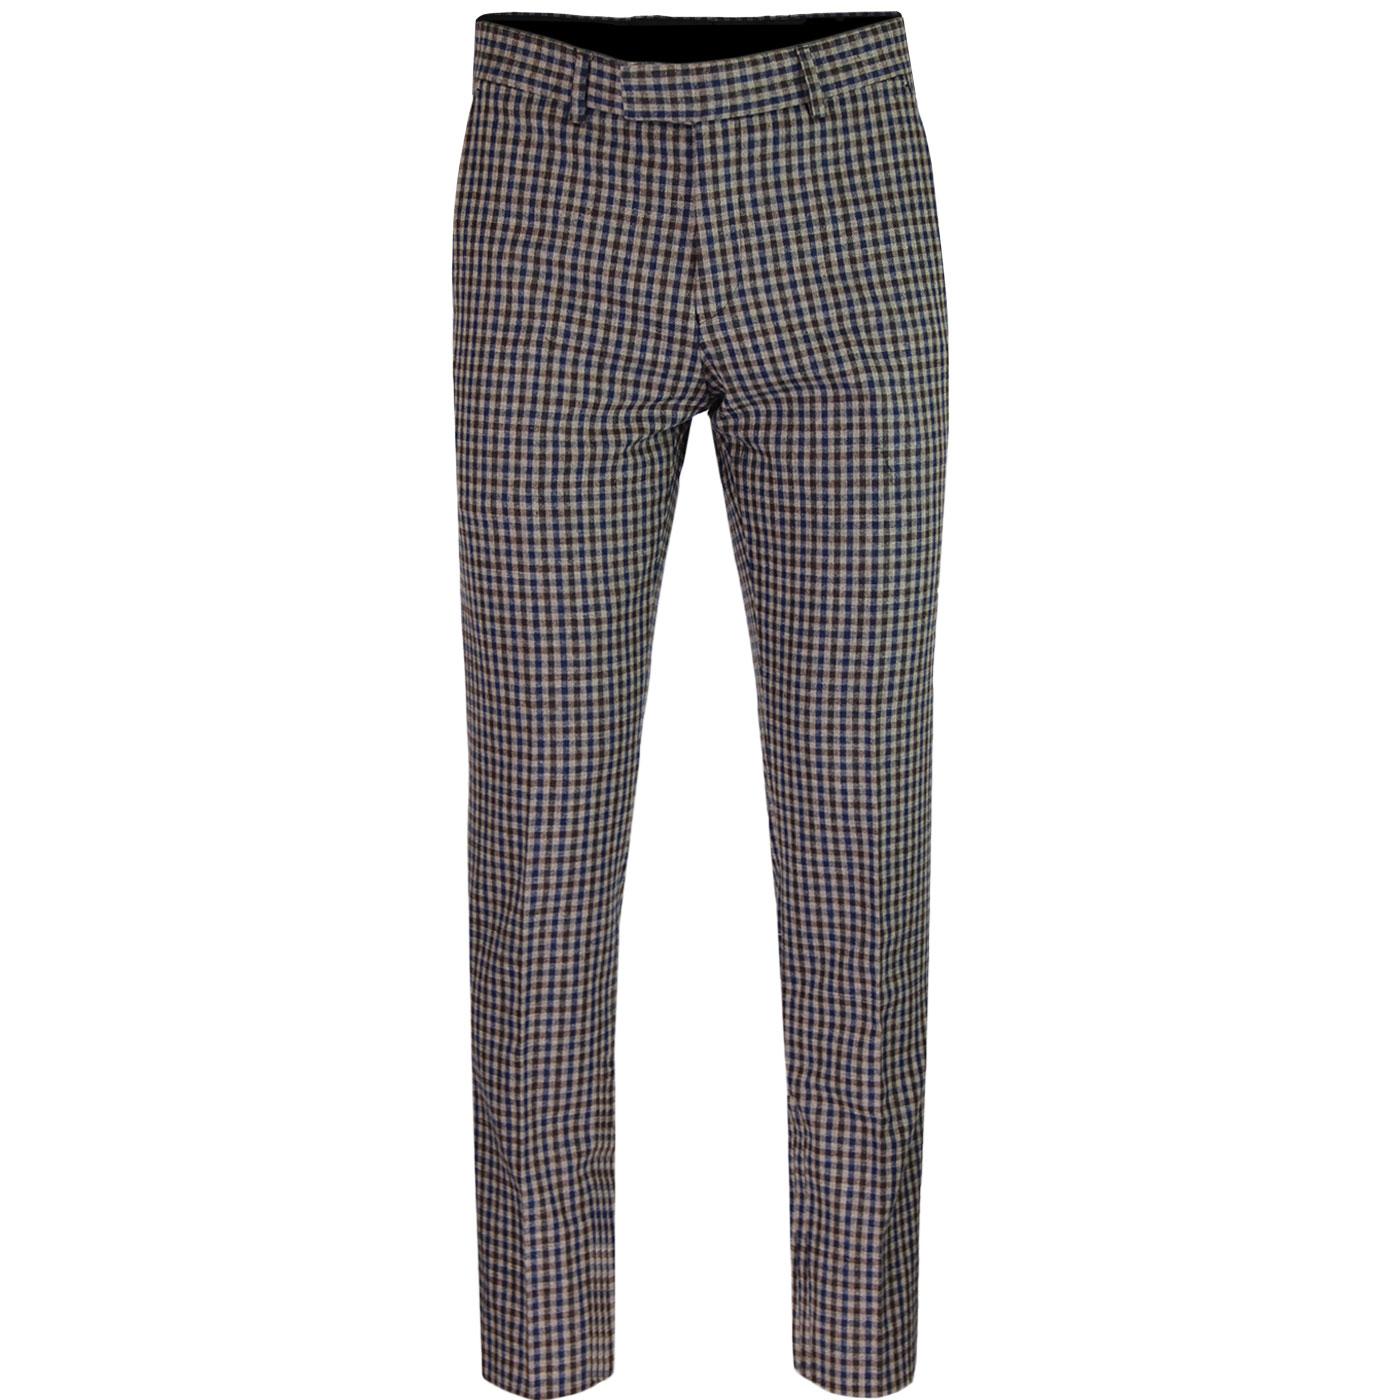 Radisson GIBSON LONDON 60s Mod Check Suit Trousers